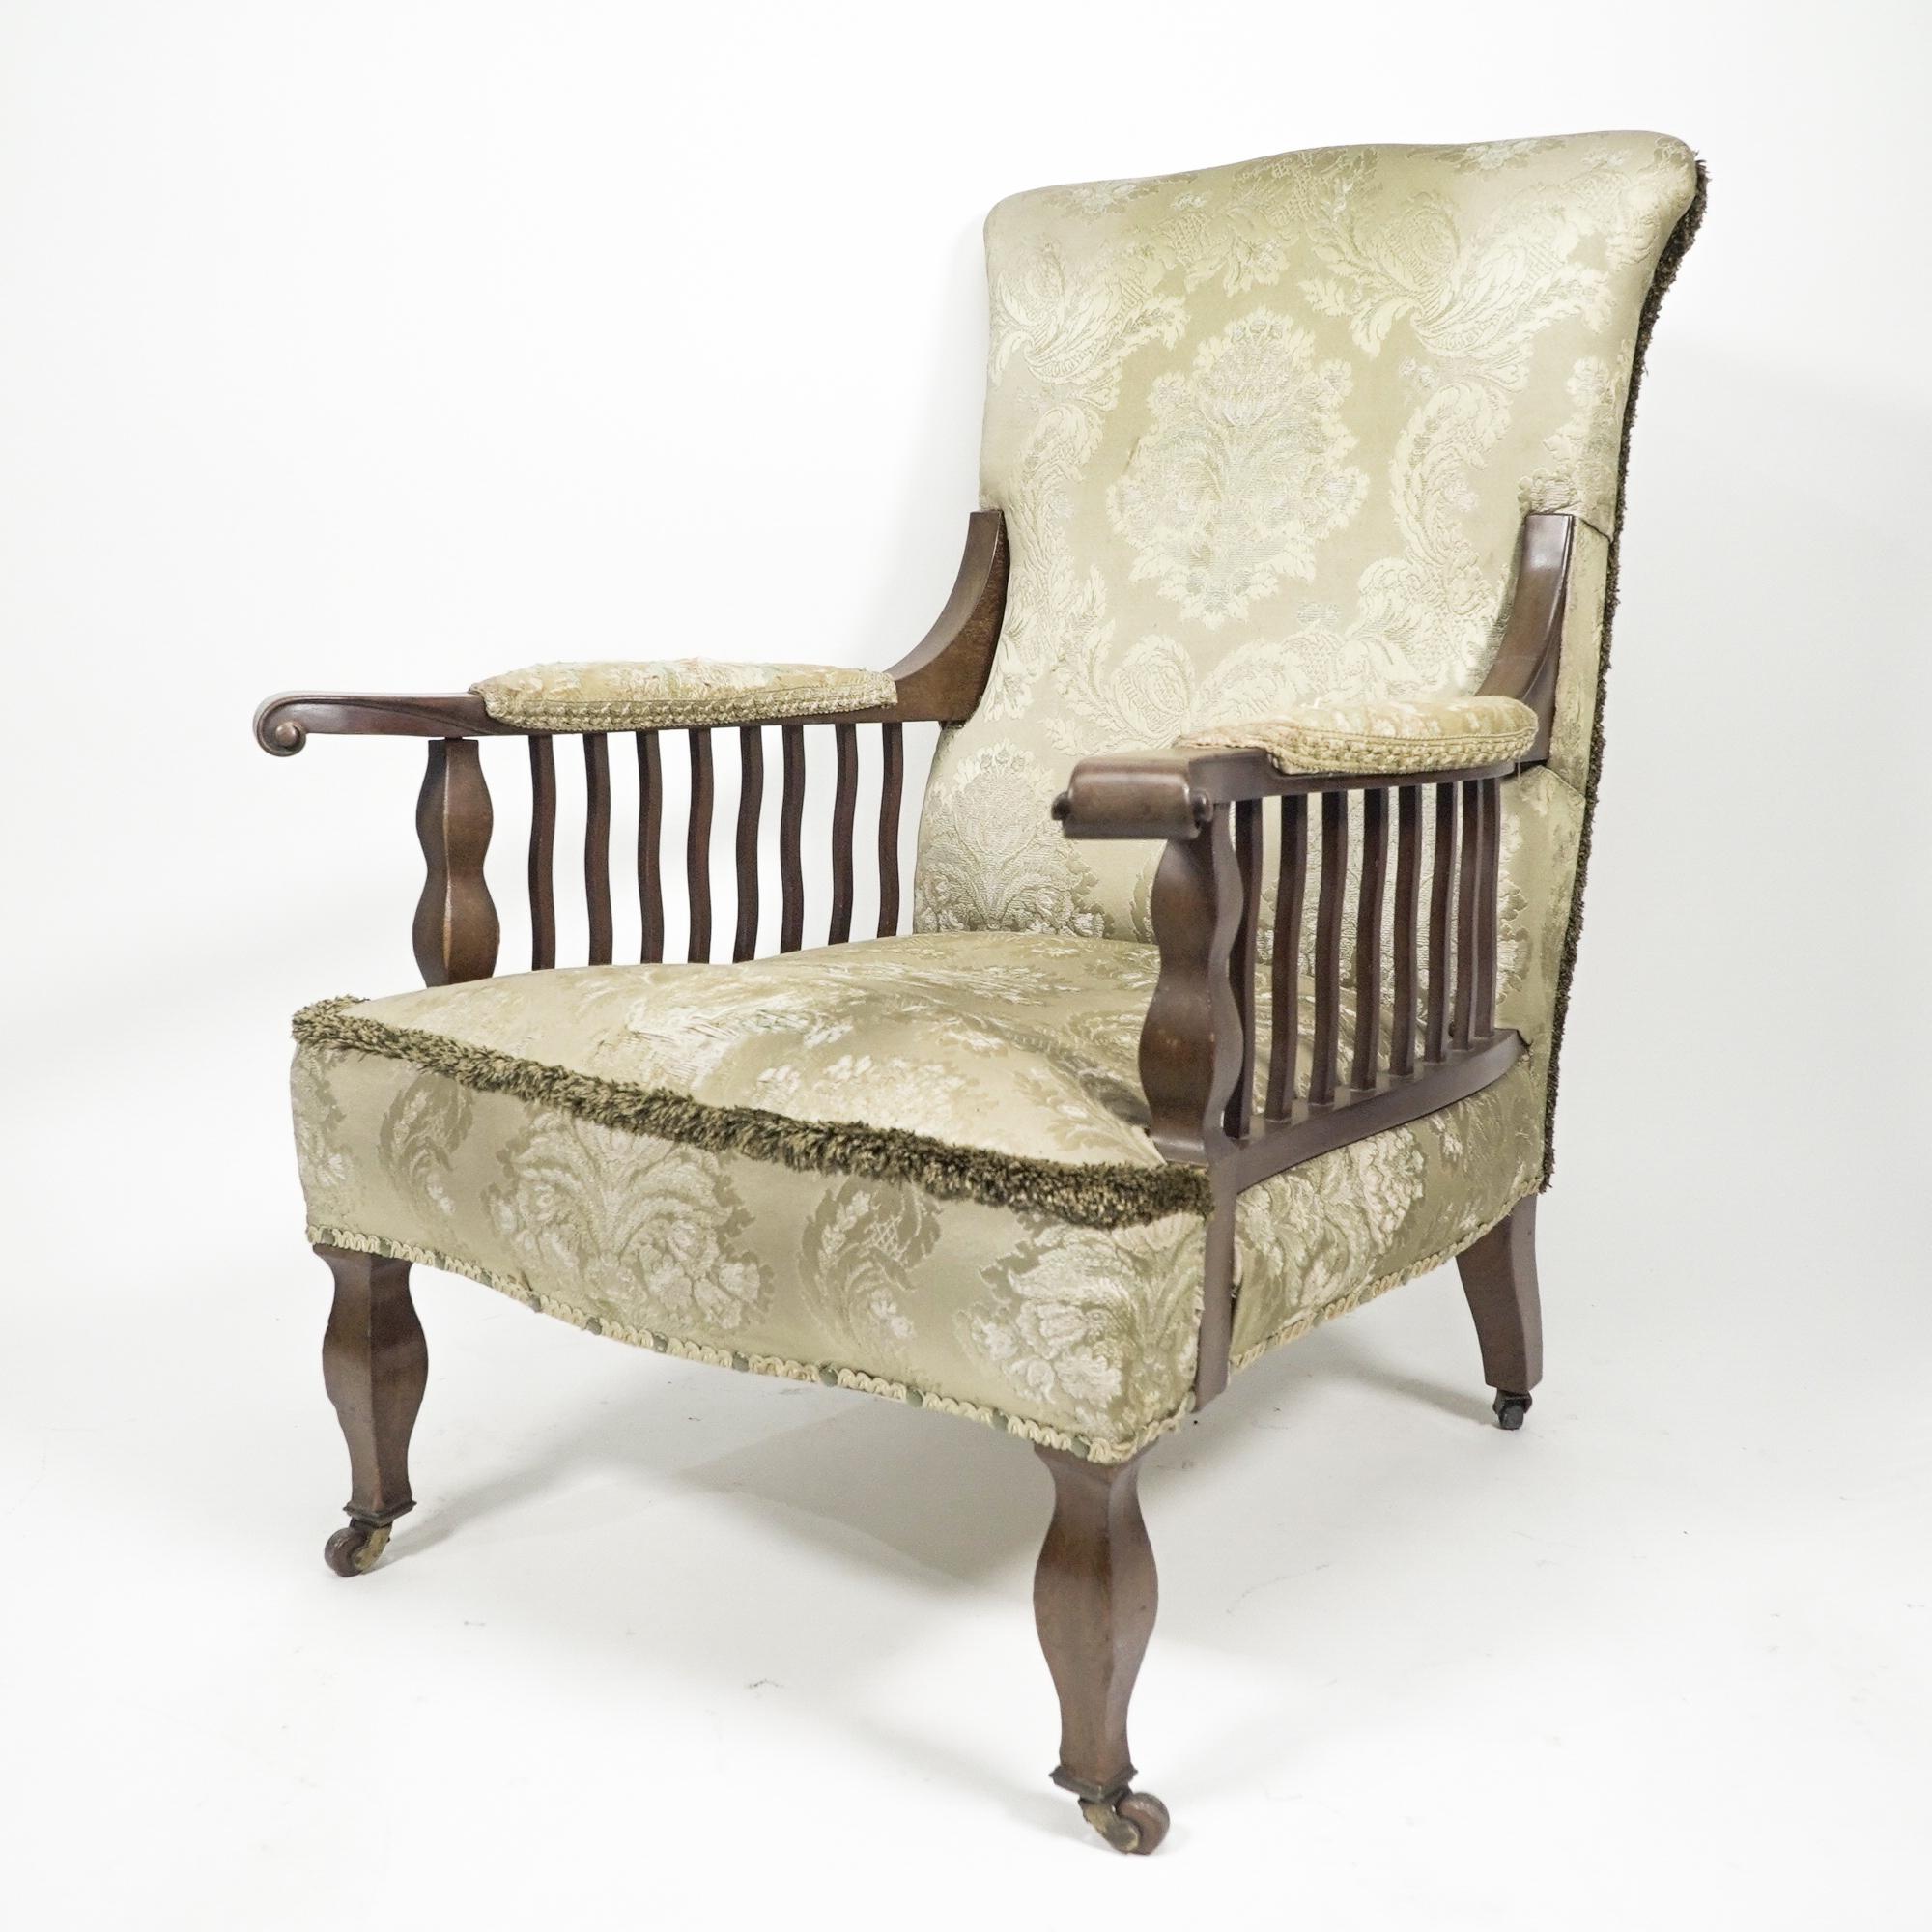 English George Jack for Morris and Co. A Pair of Mahogany Saville armchairs For Sale